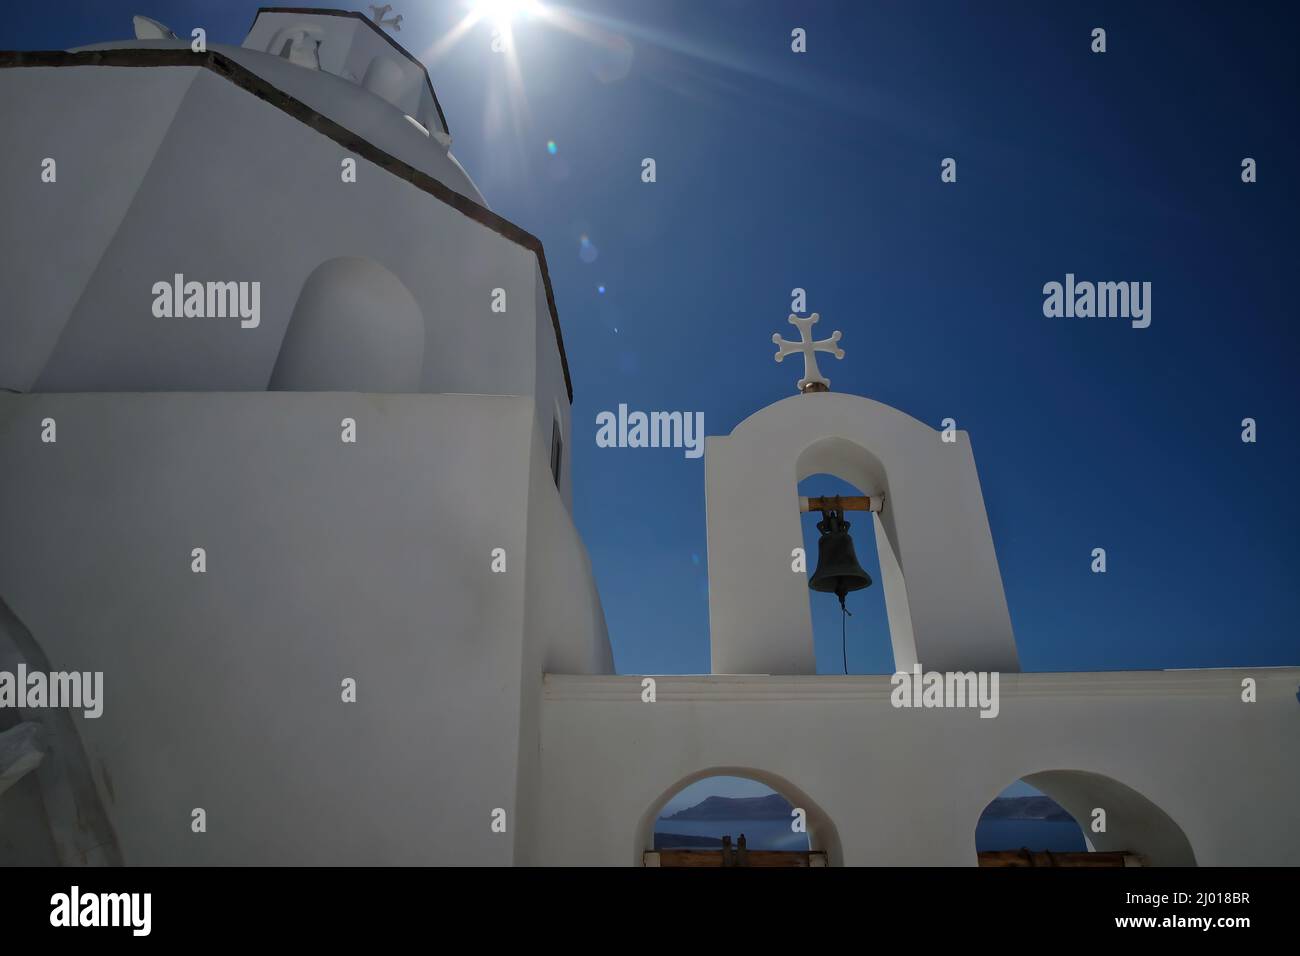 Low angle view of a whitewashed church with bells, a crucifix and sunstars above in the sky Stock Photo